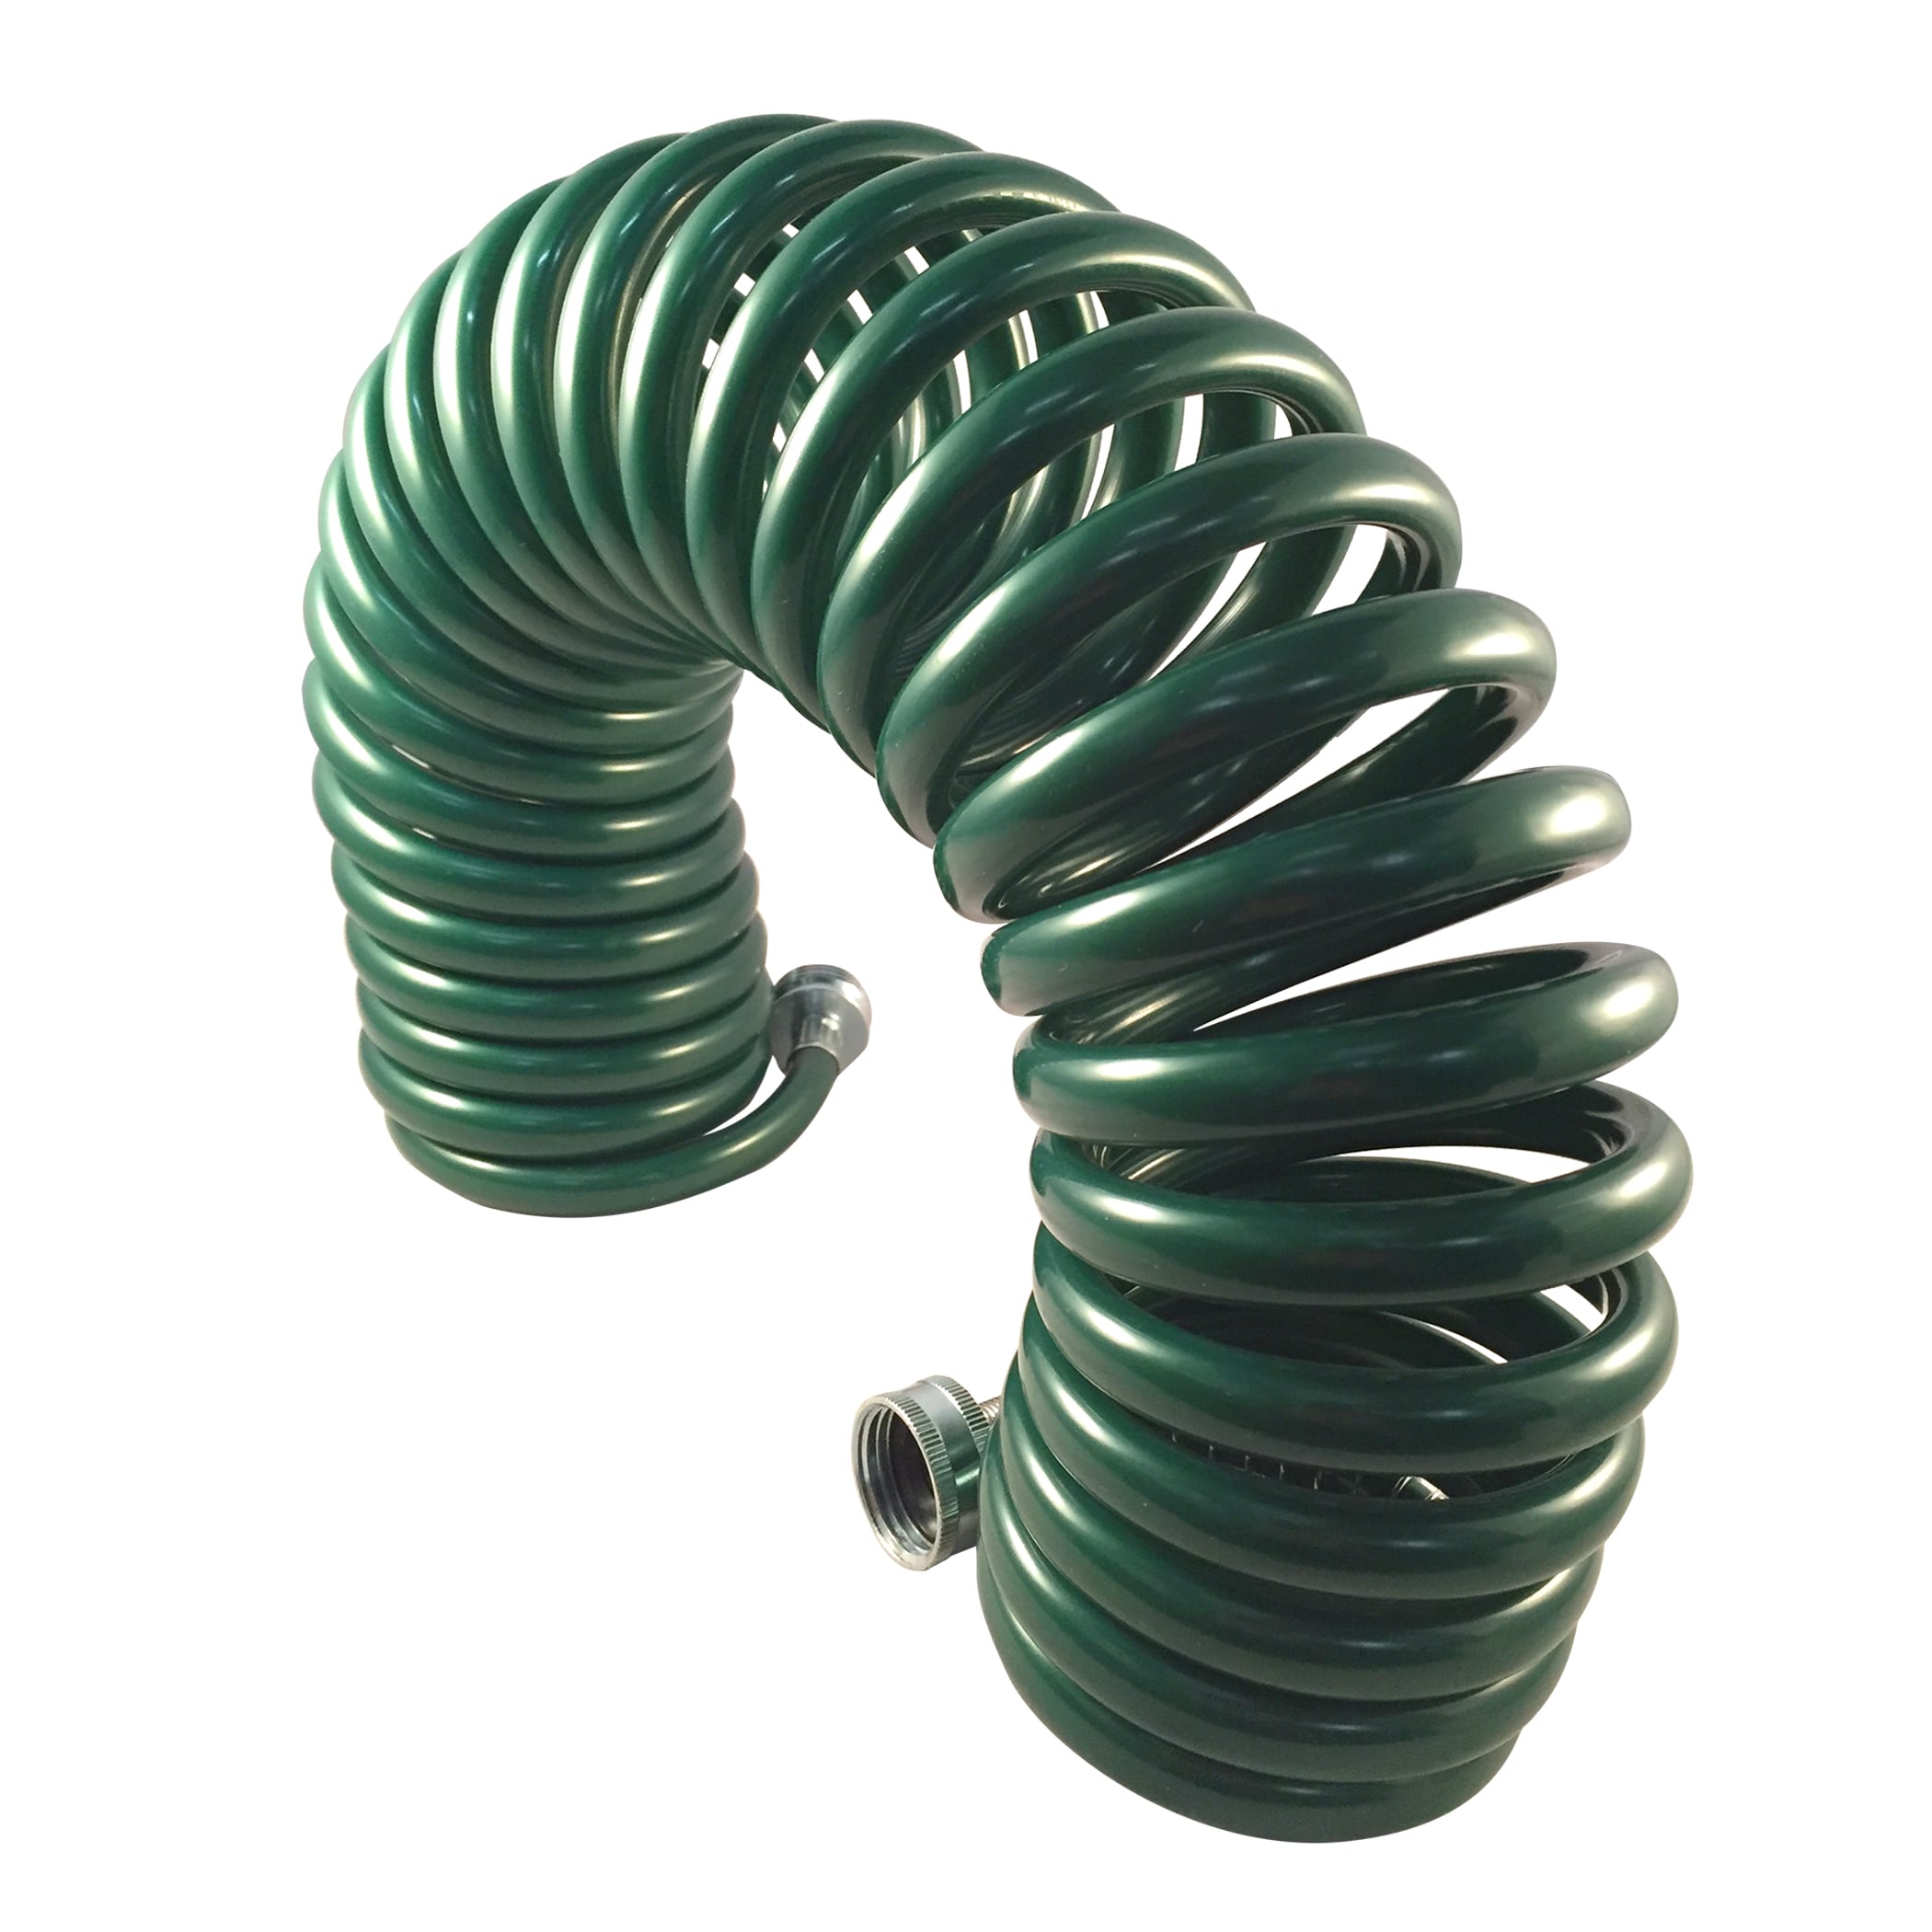 Short or Long Curly Outdoor Garden Hose Pipe for Water Transfer